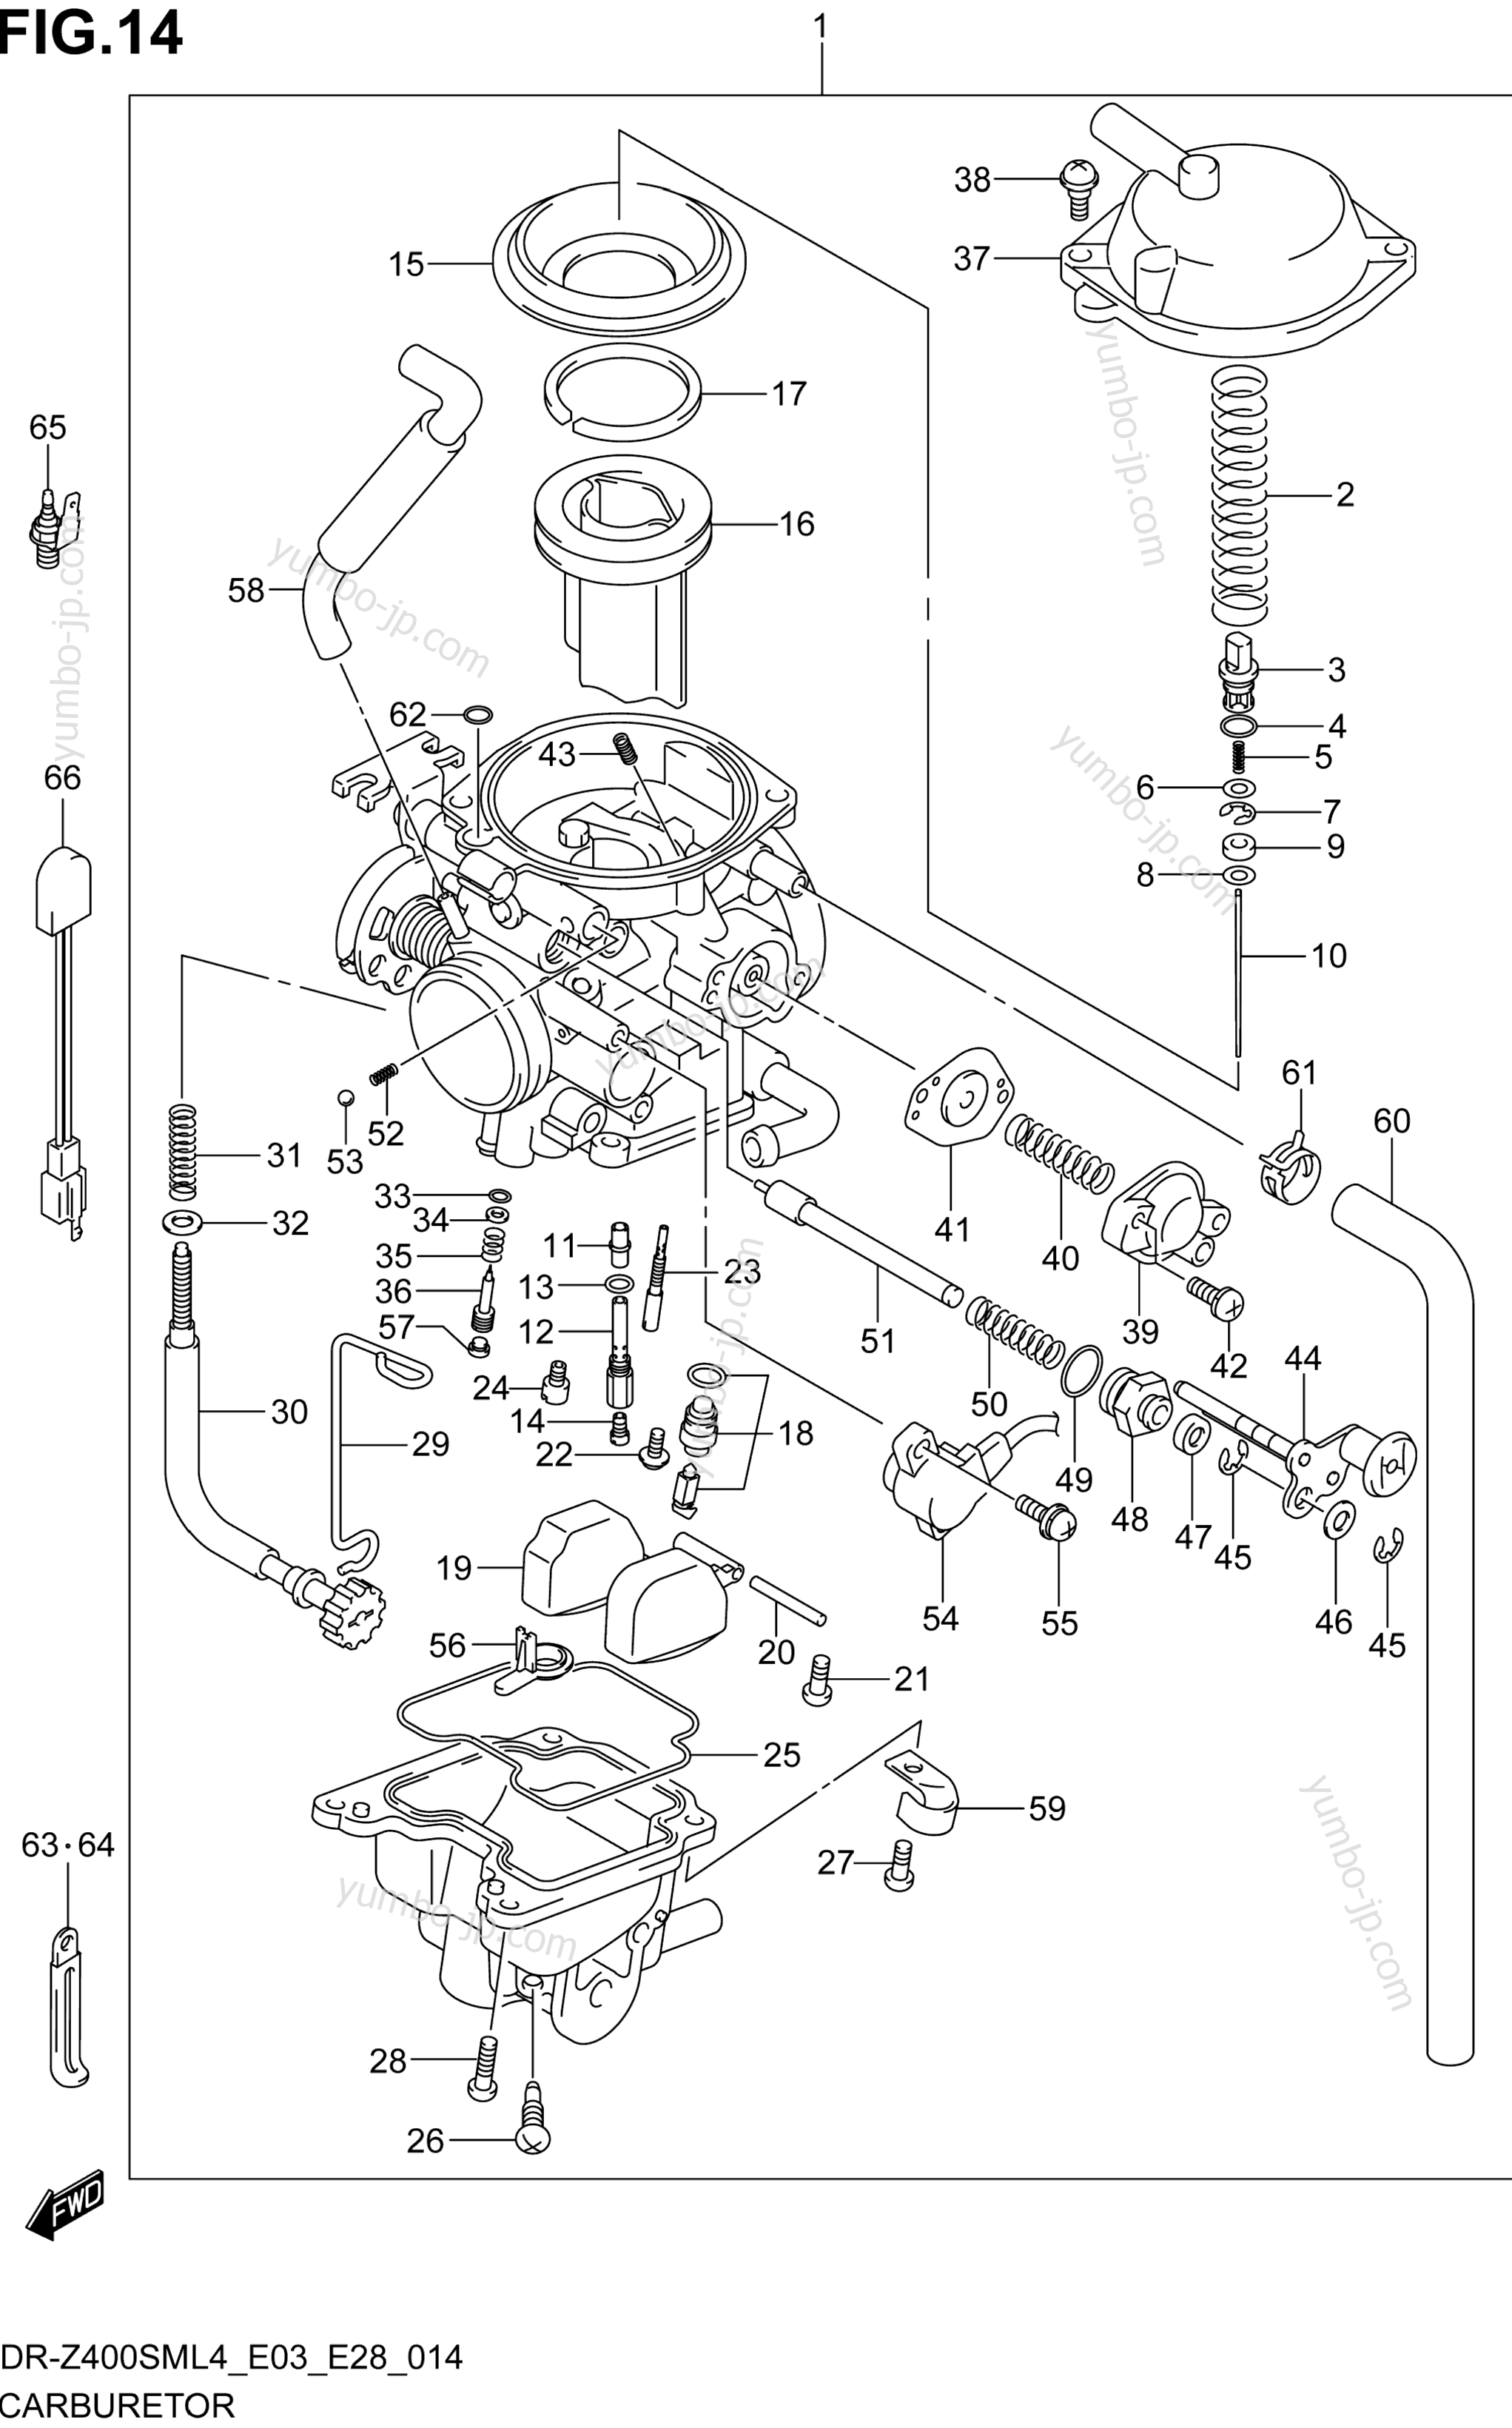 CARBURETOR (DR-Z400SML4 E33) for motorcycles SUZUKI DR-Z400SM 2014 year